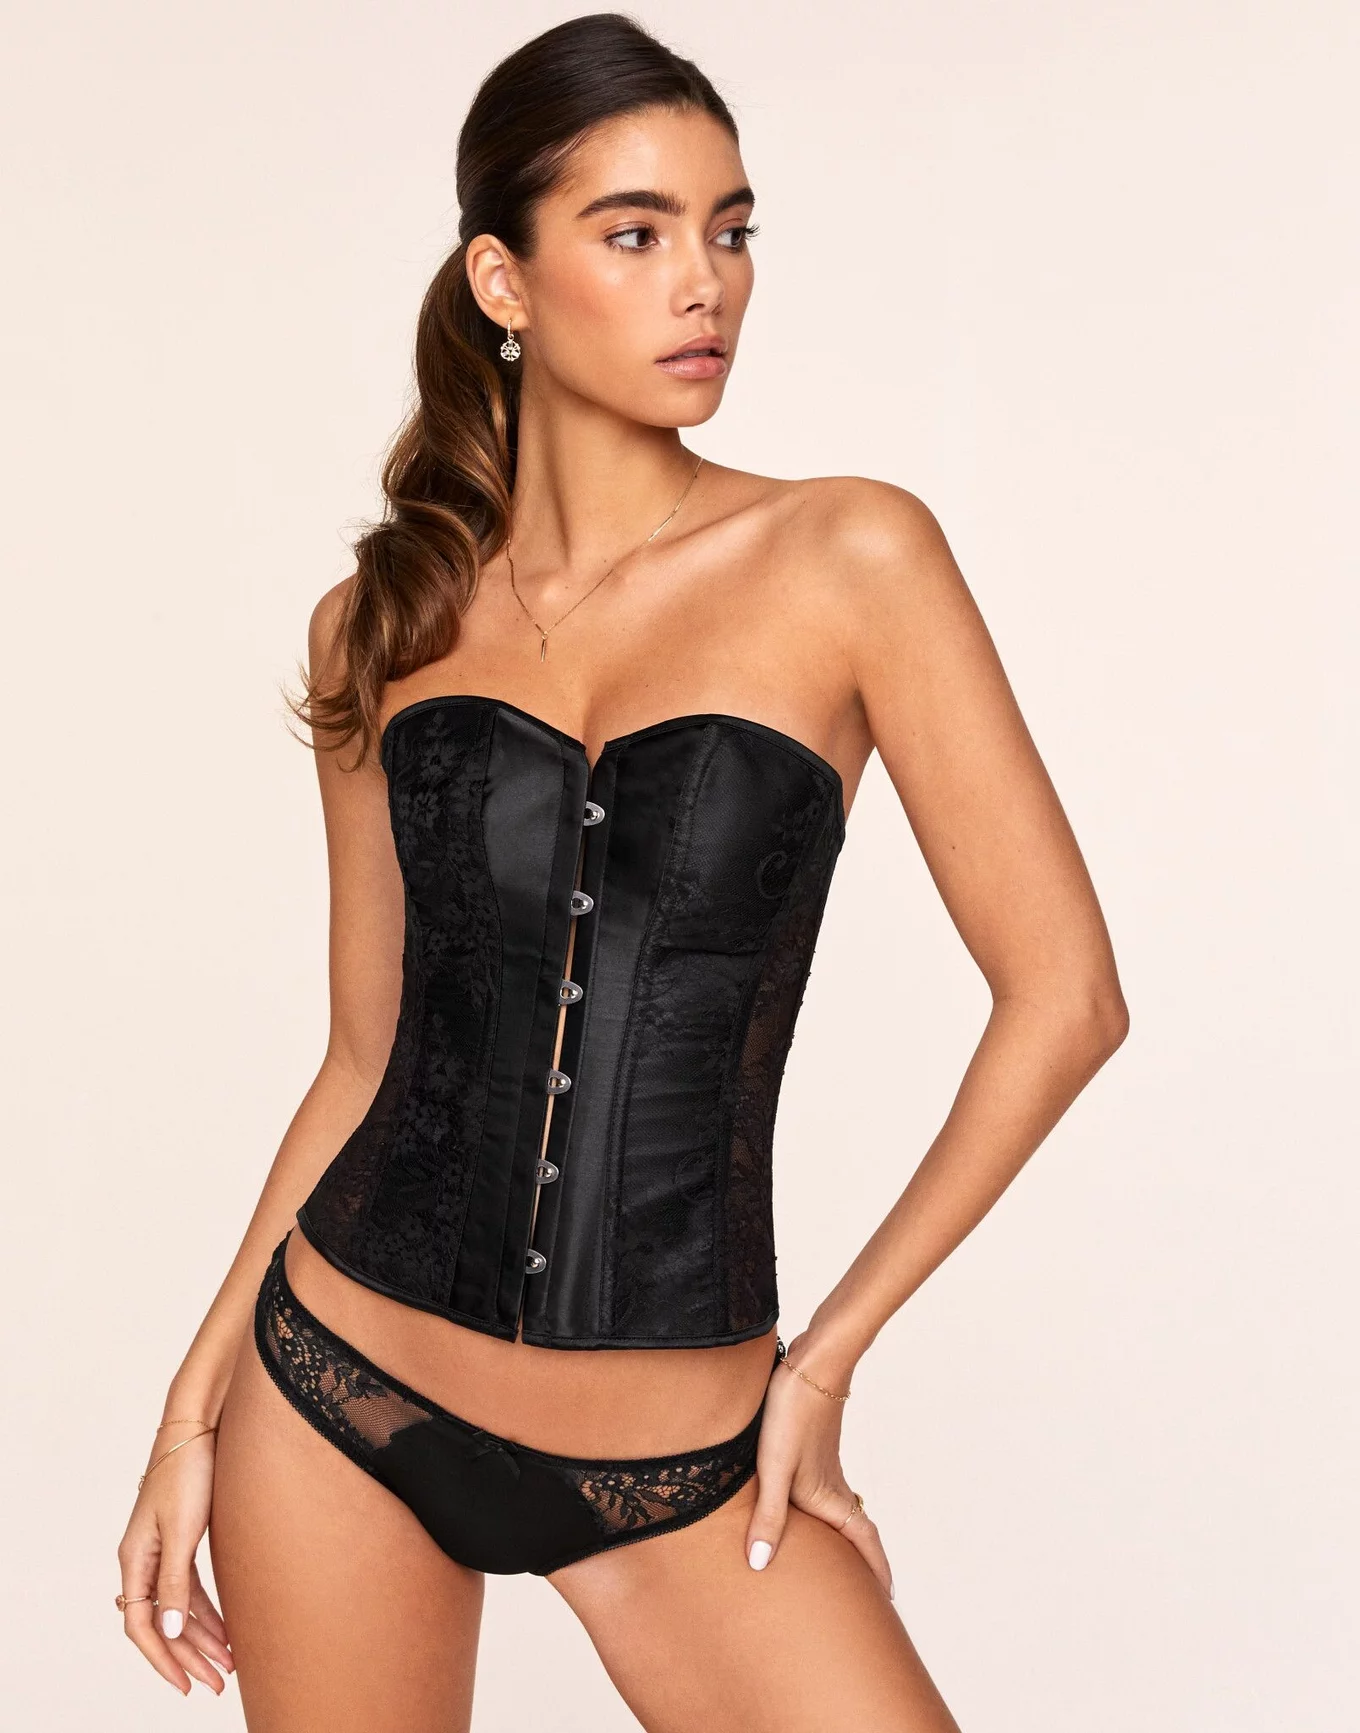 Adore Me - LACE THINGS UP! 🖤 Our newest corset ups the wow factor in a  sexy longer-length silhouette.